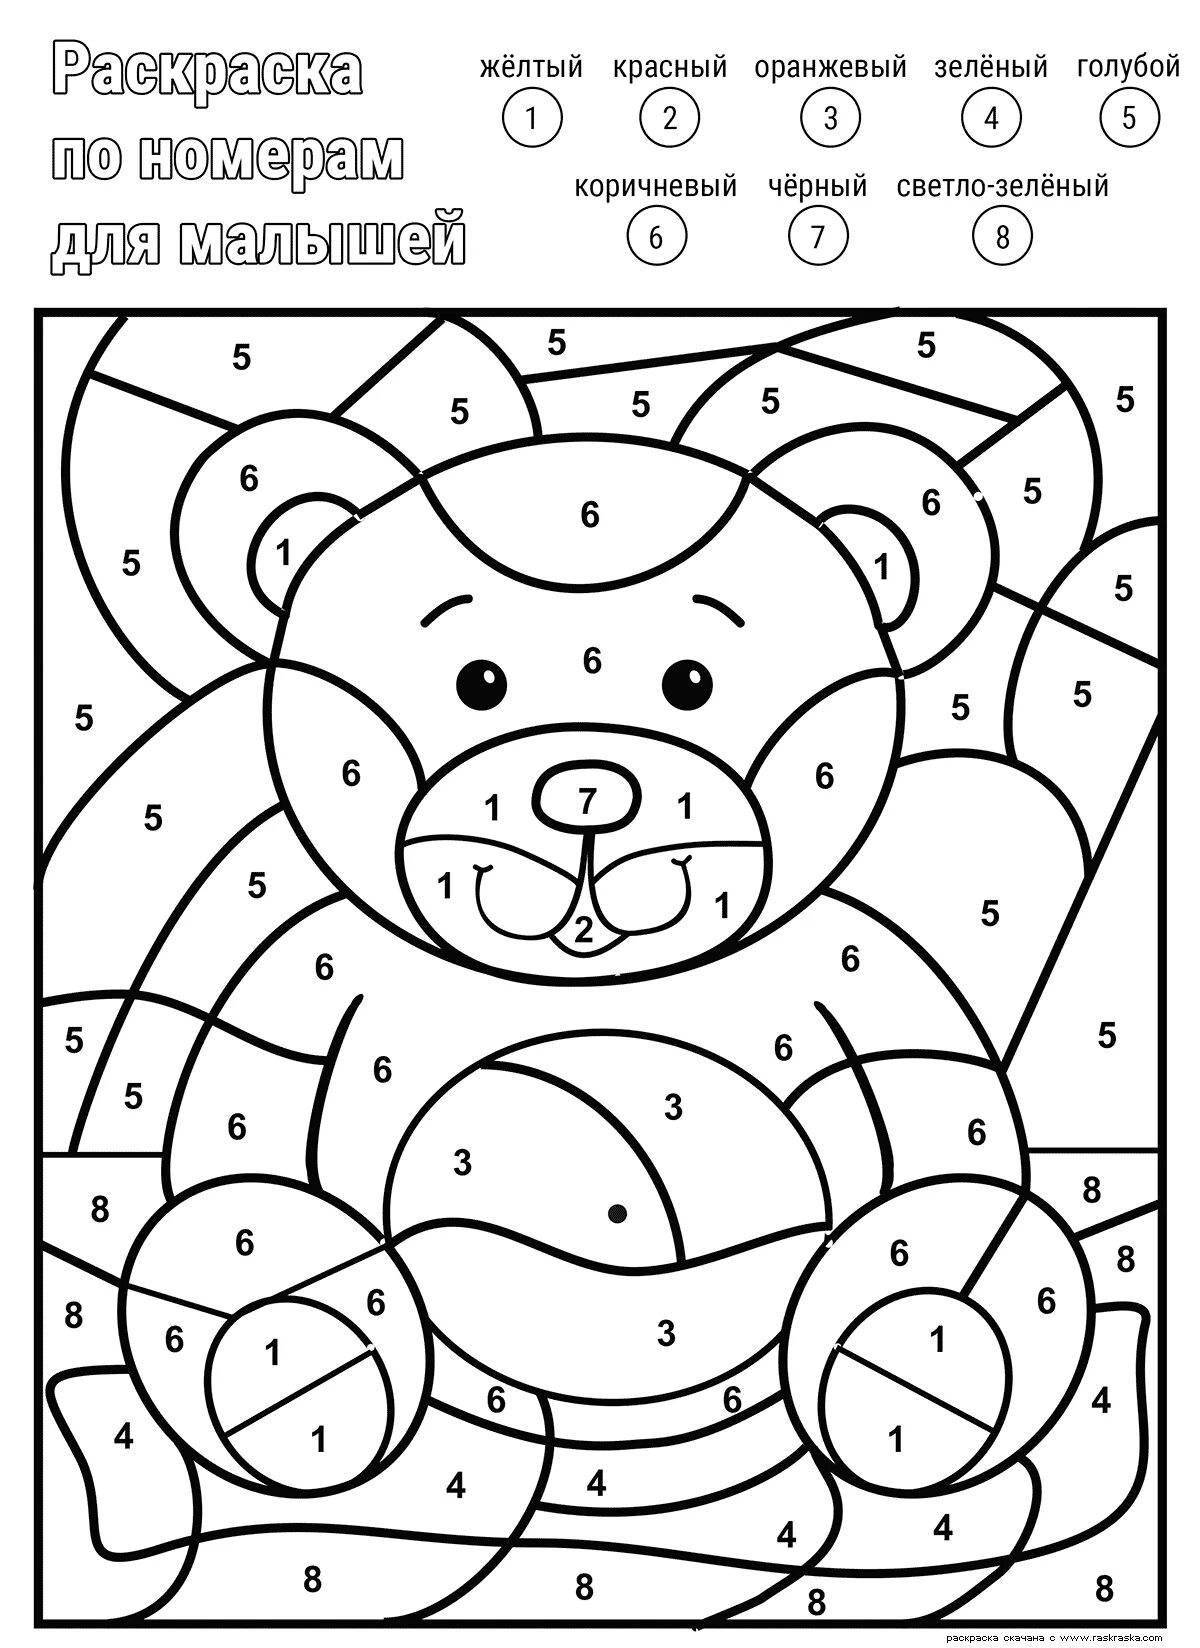 Live coloring by numbers for children 6-7 years old